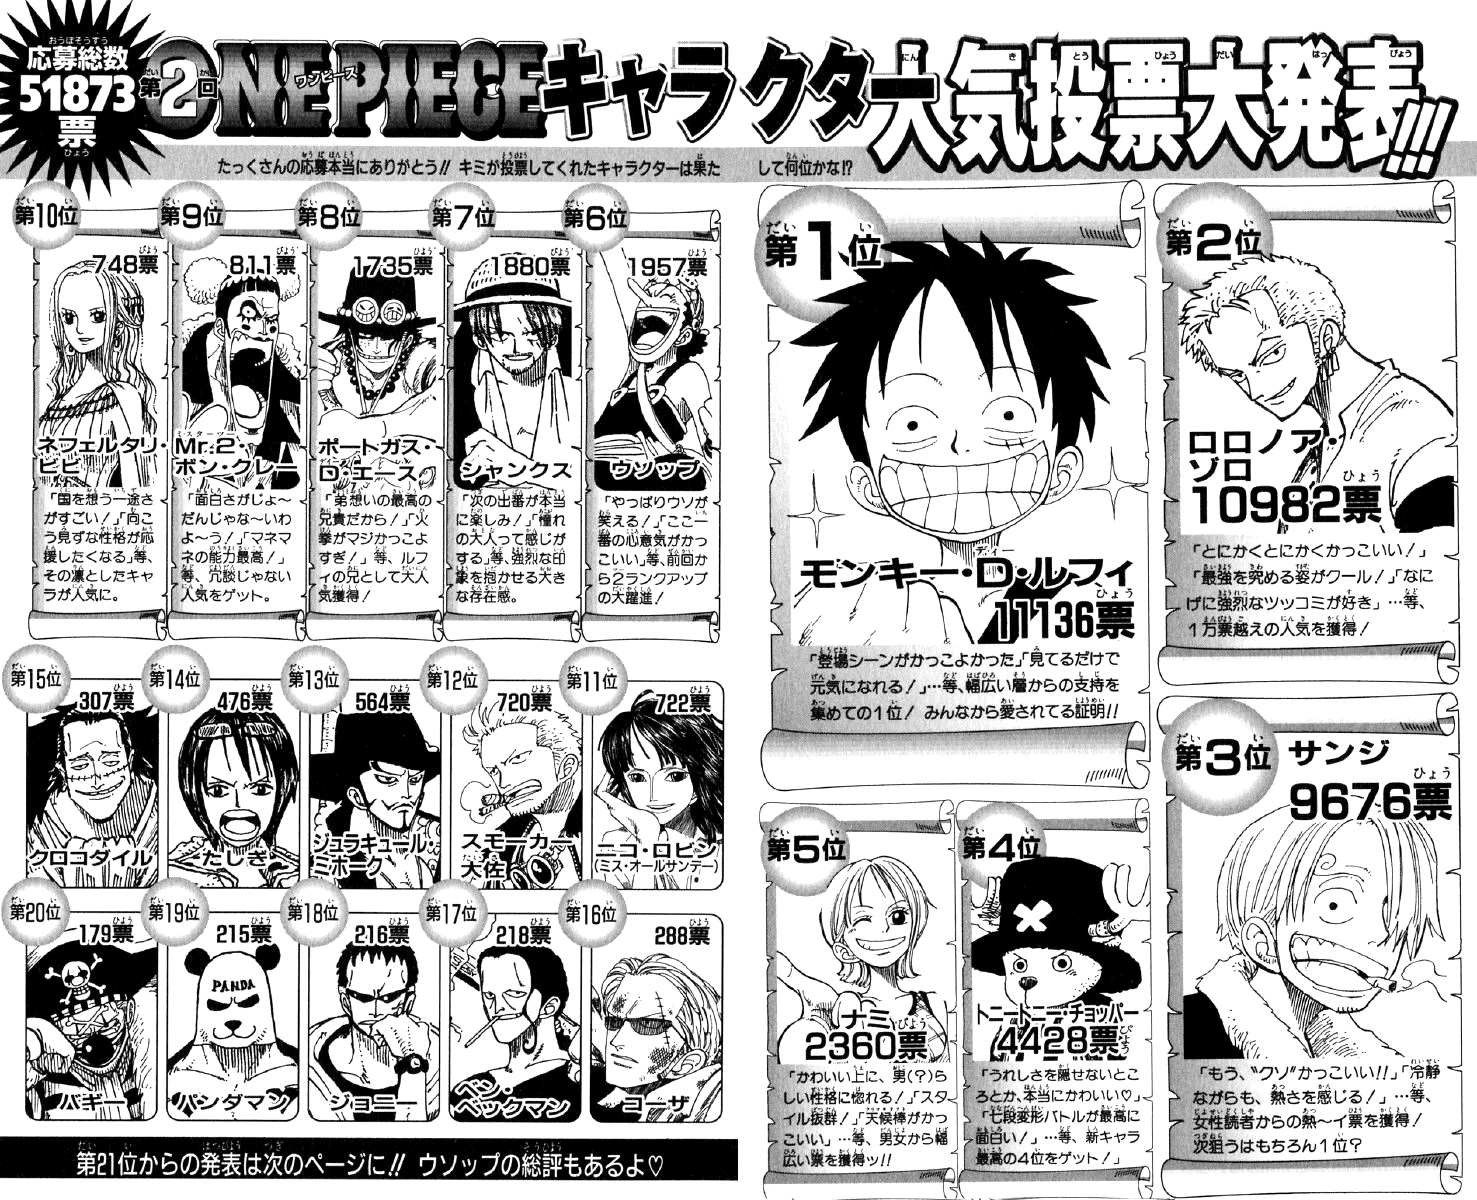 The One Piece Remake Anime Announced from WIT Studio - Crunchyroll News